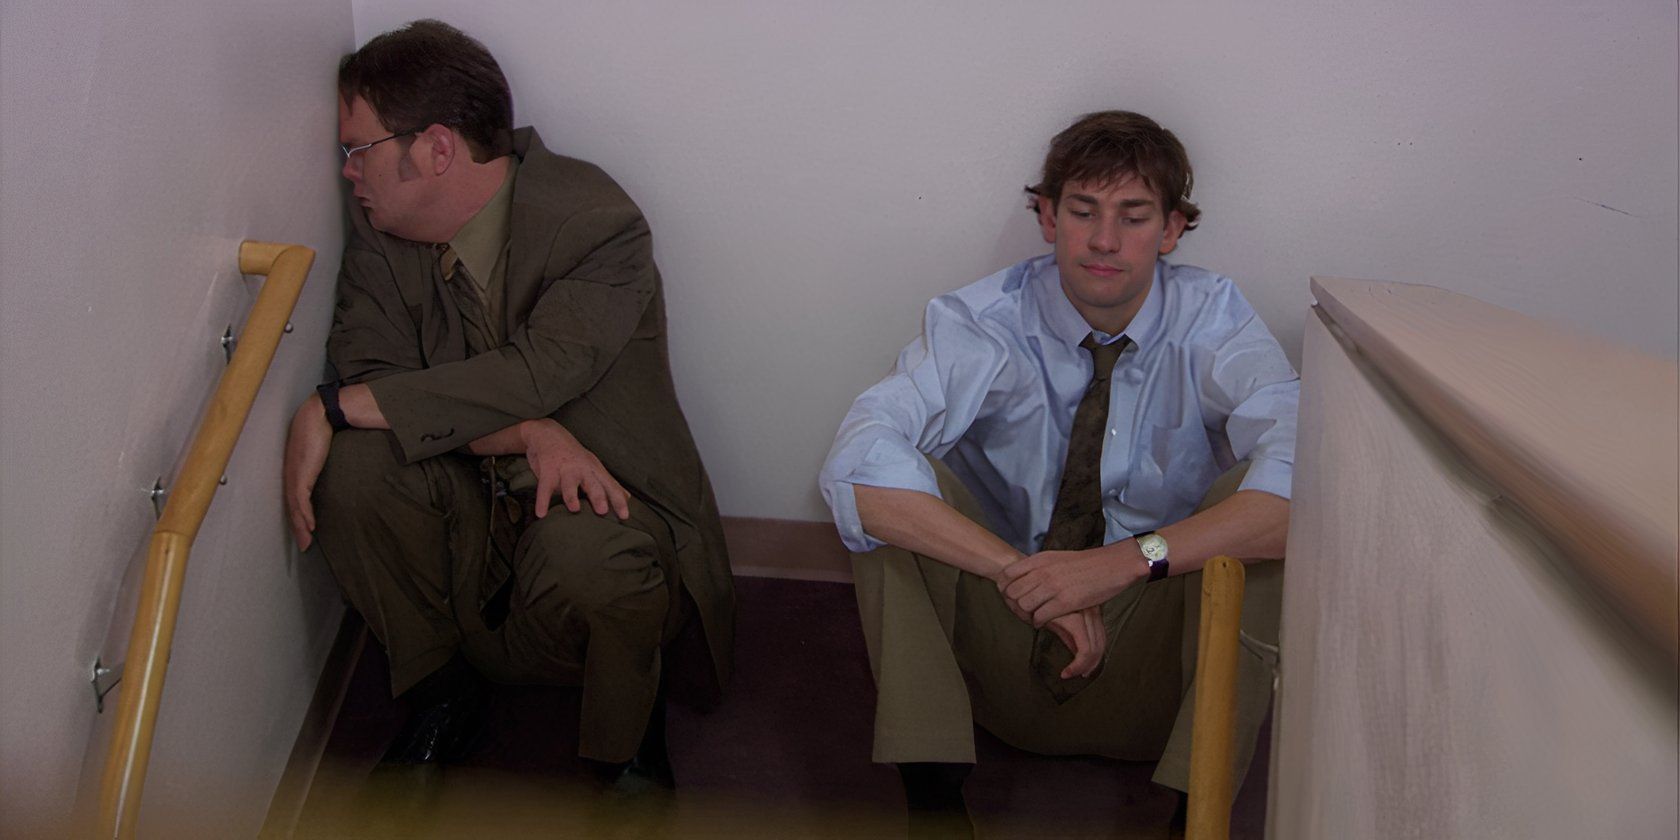 Jim Comforts Dwight in Stairwell in the Office 